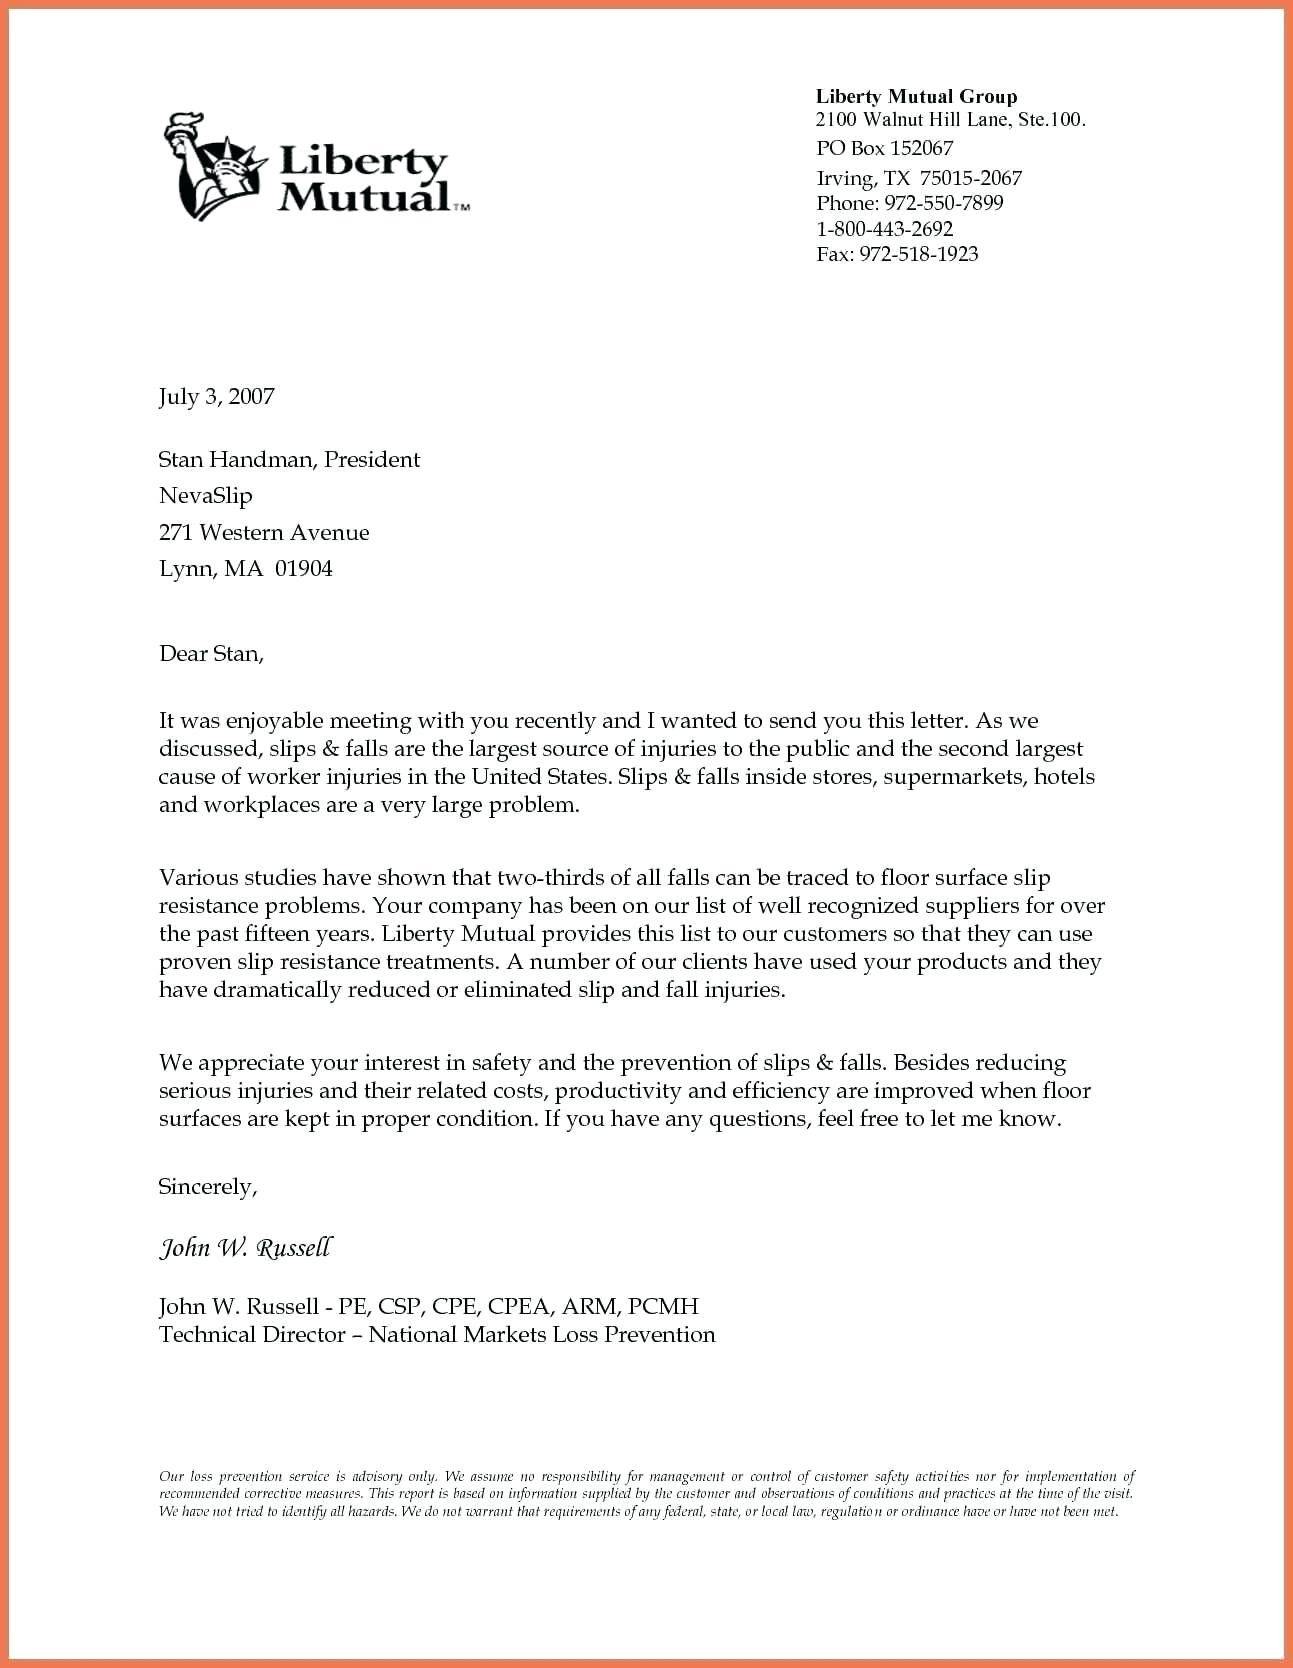 Business Letter Template Word - Birthday Letter Inside Microsoft Word Business Letter Template